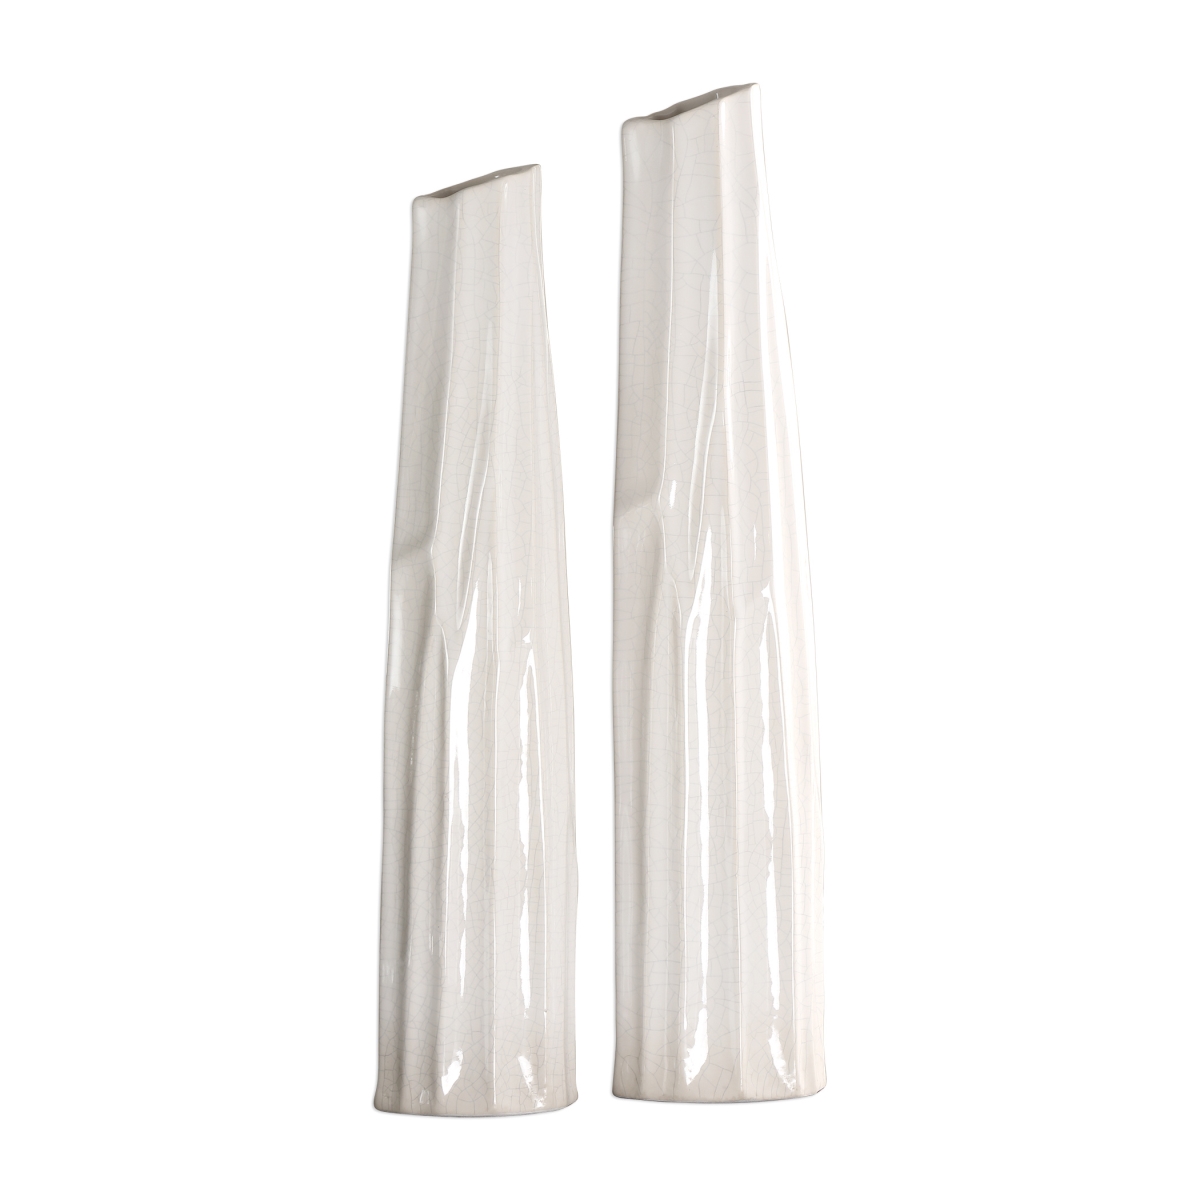 Picture of 212 Main 18868 Kenley Crackled White Vases  Set of 2